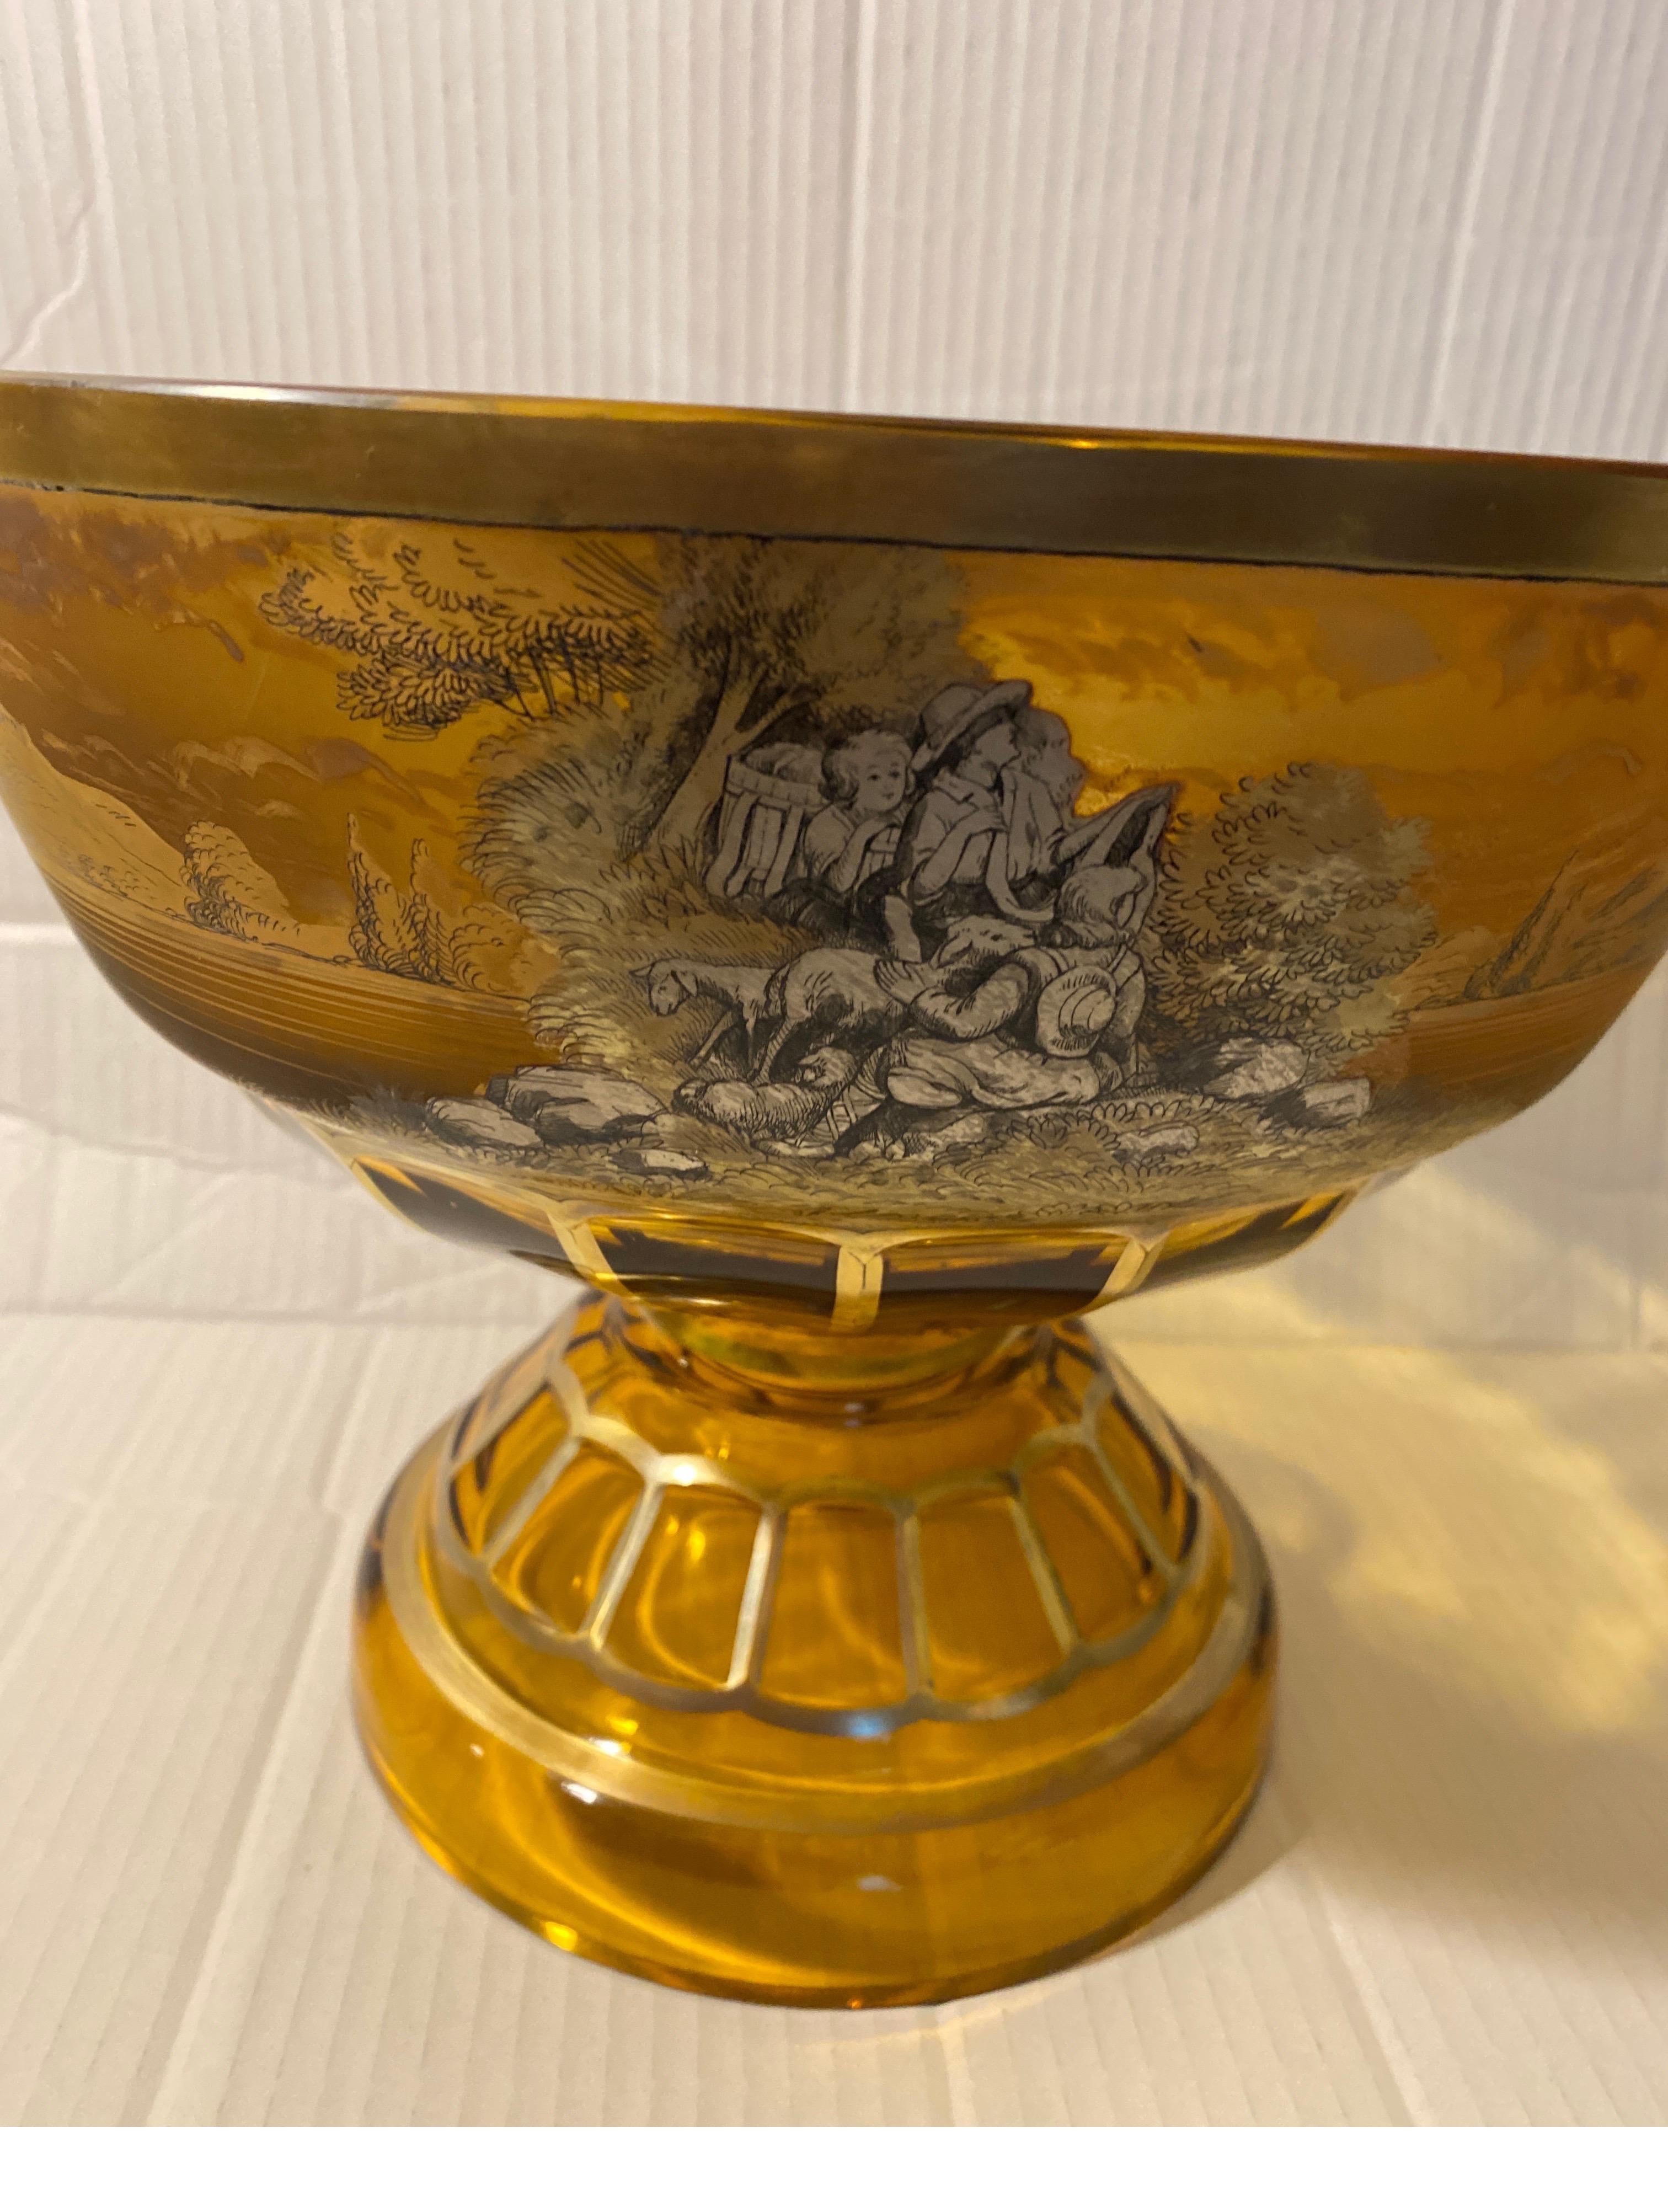 An early 20th century panel cut amber crystal bowl by Anton Kusak, The bowl with painted Platinum and gold decoration. It has a shepherd scene peasant women and more painted decoration around the bowl Kusak emigrated from Europe and started the